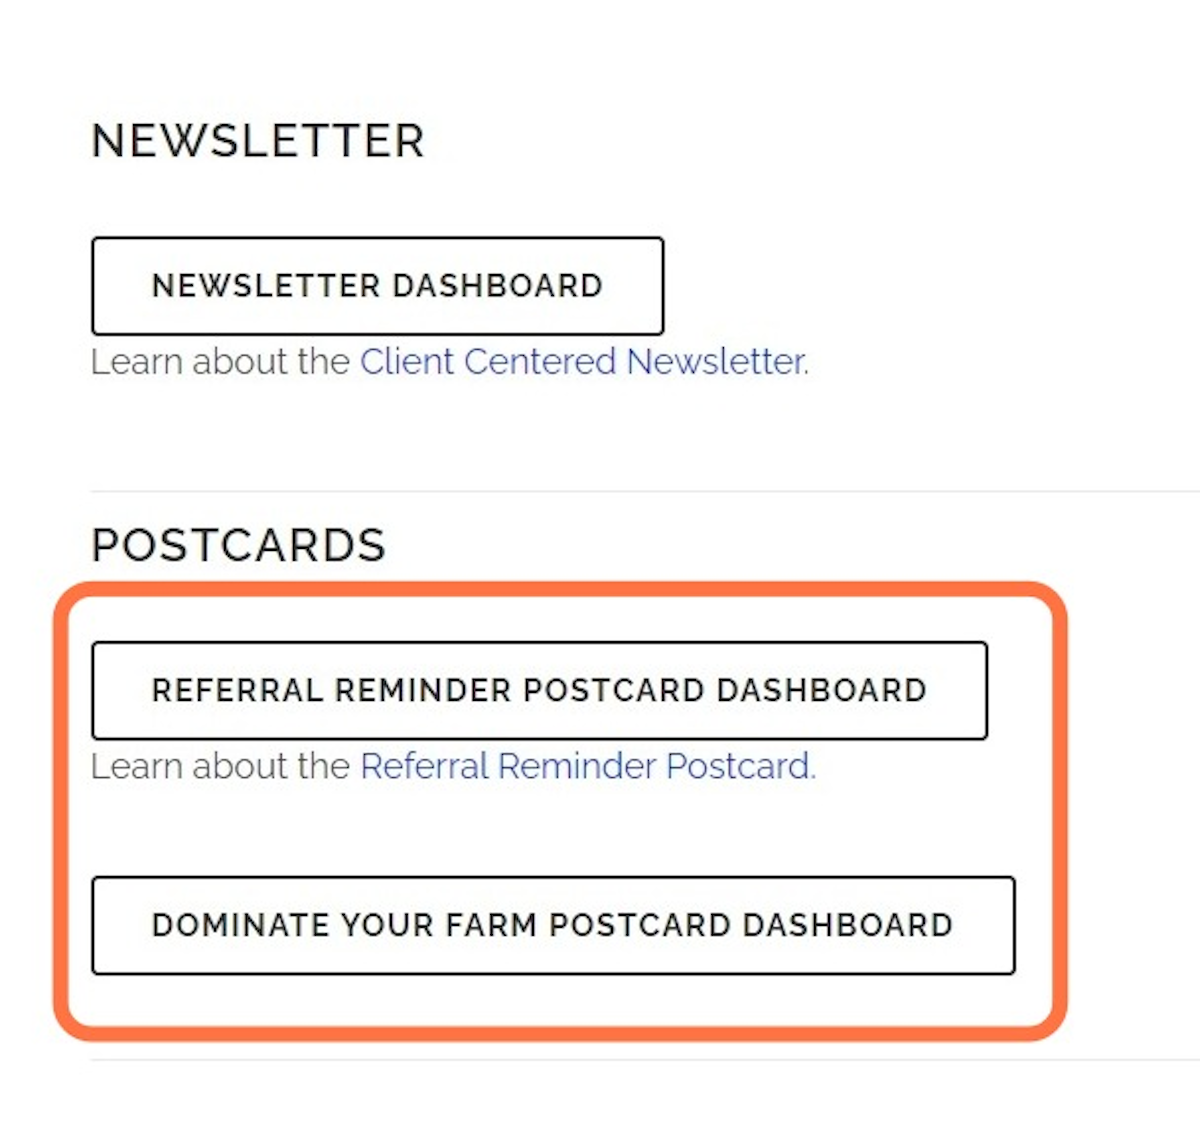 Follow the same steps as above to edit your Referral Reminder or Dominate Your Farm postcards